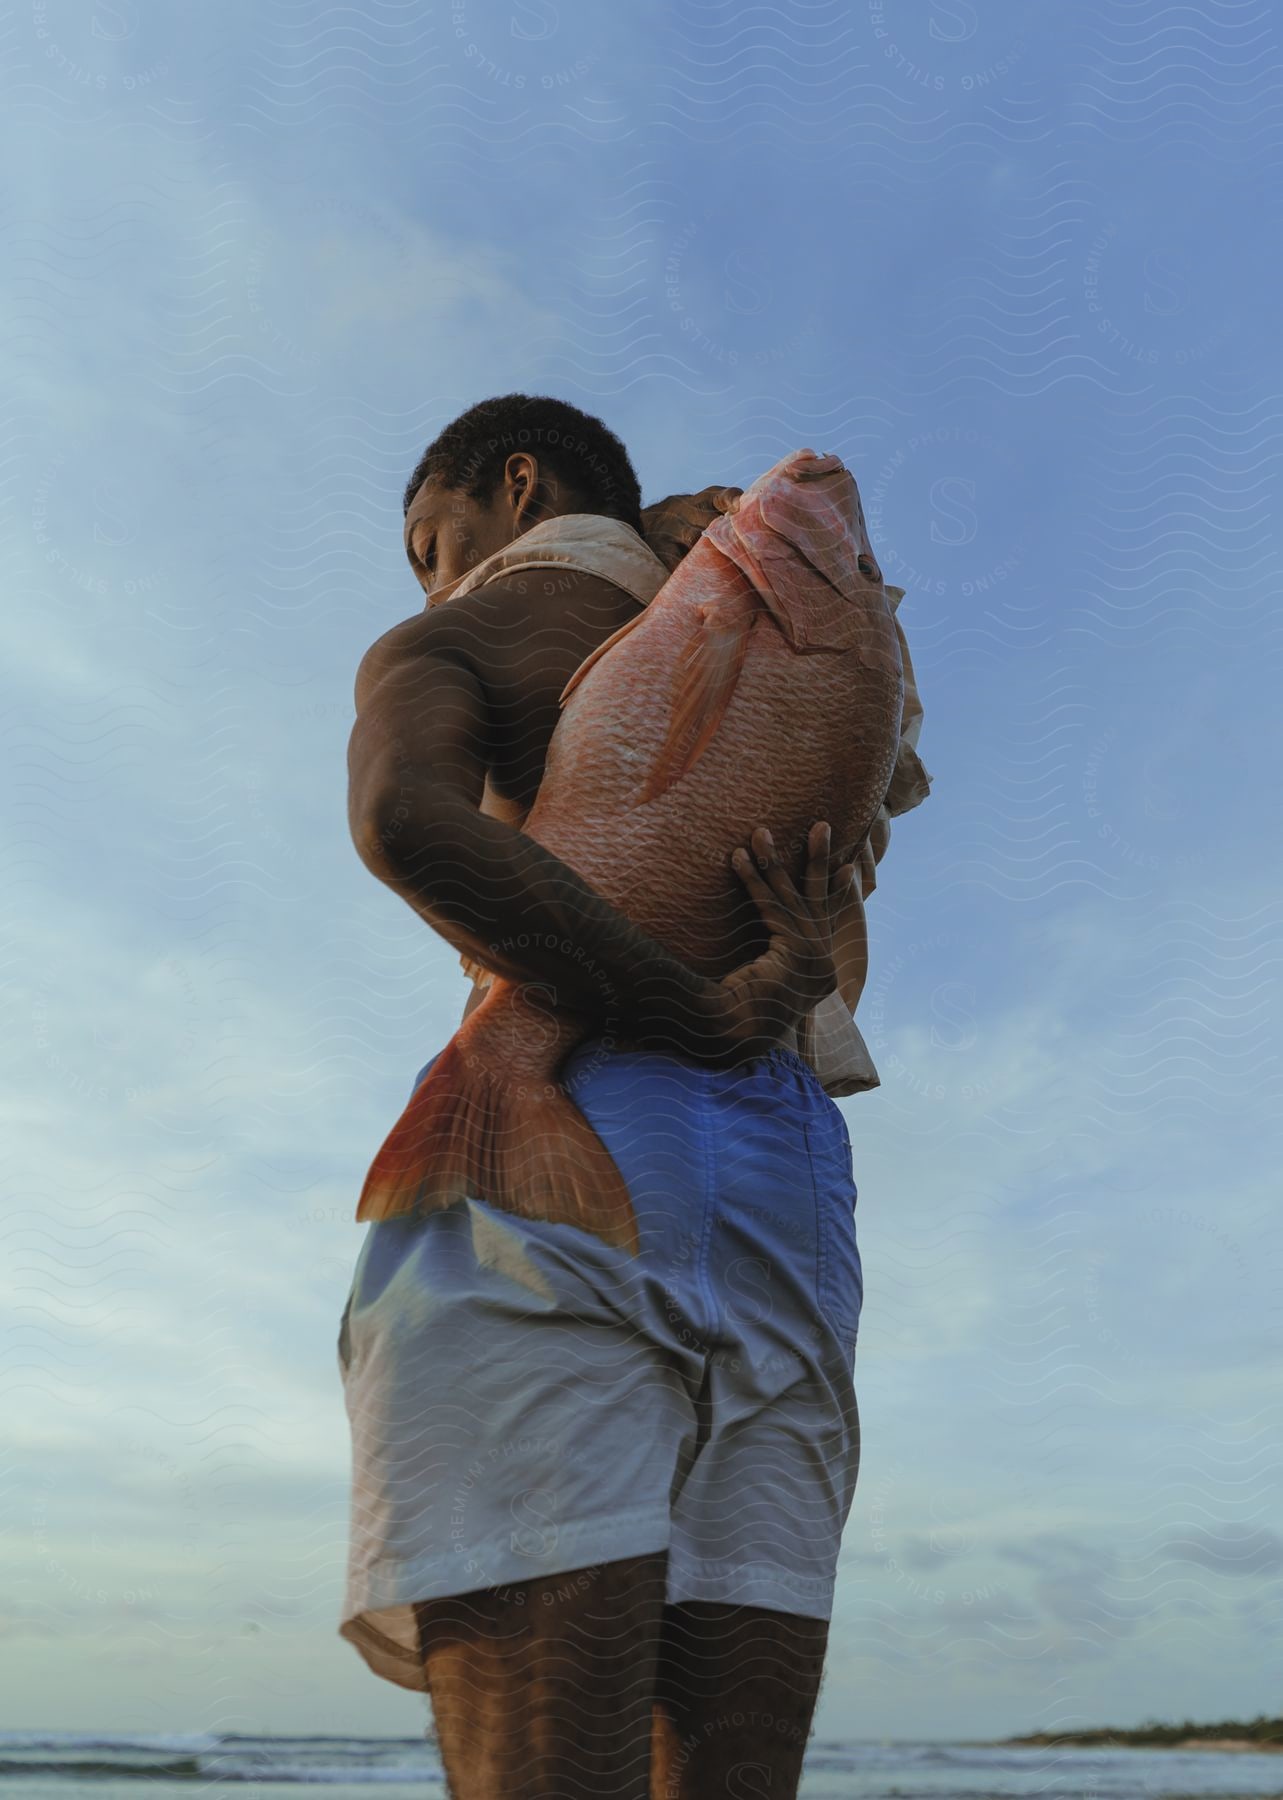 A man standing carrying a large red snapper on his back near the ocean